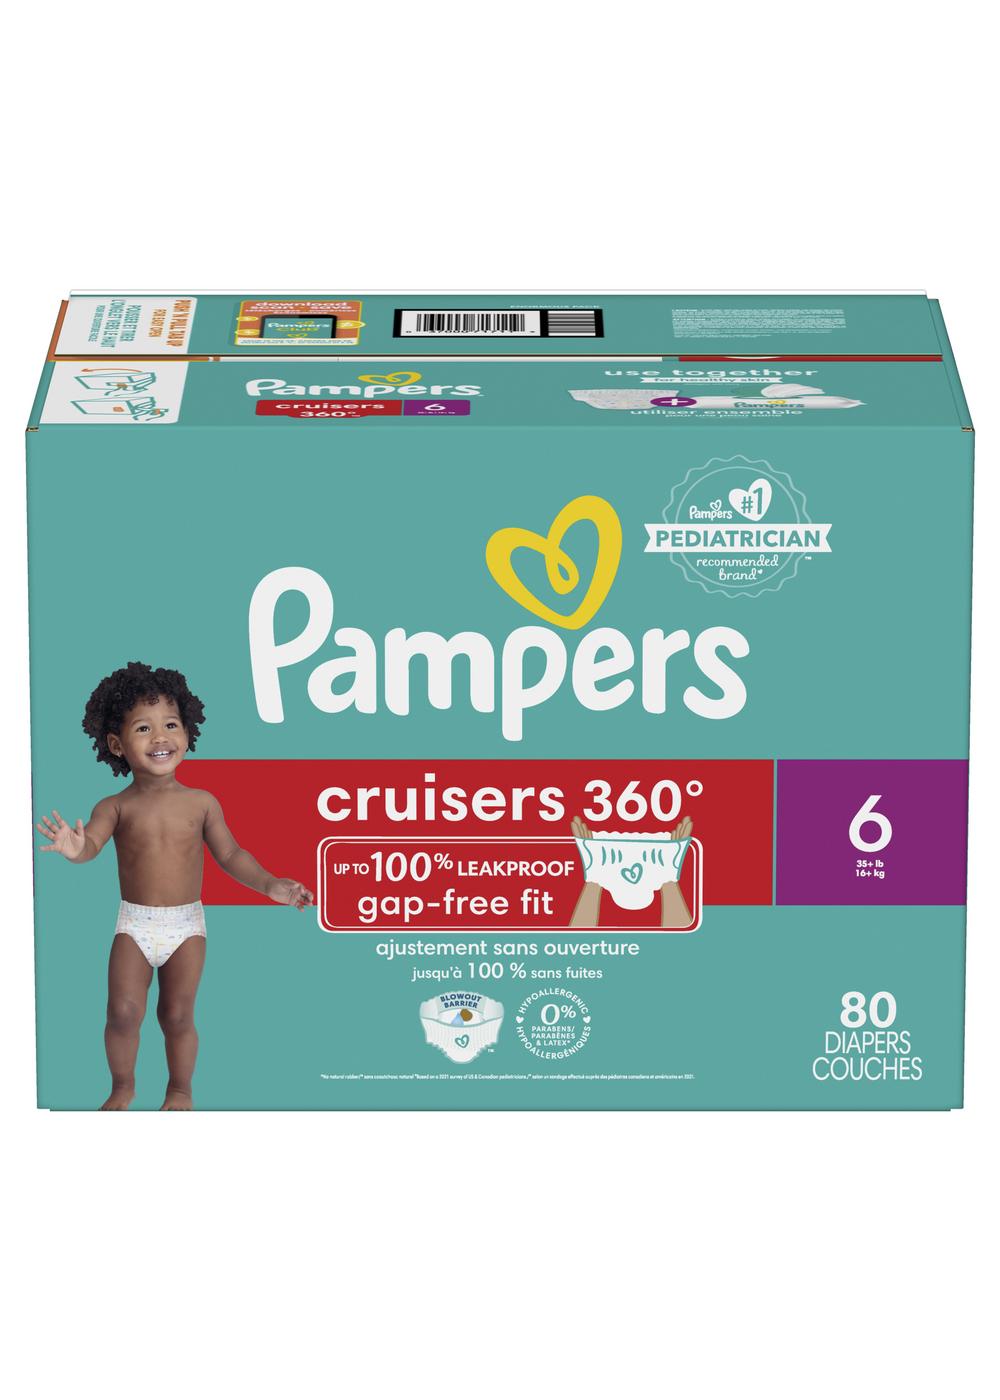 Pampers Cruisers 360 Diapers - Size 6; image 10 of 10